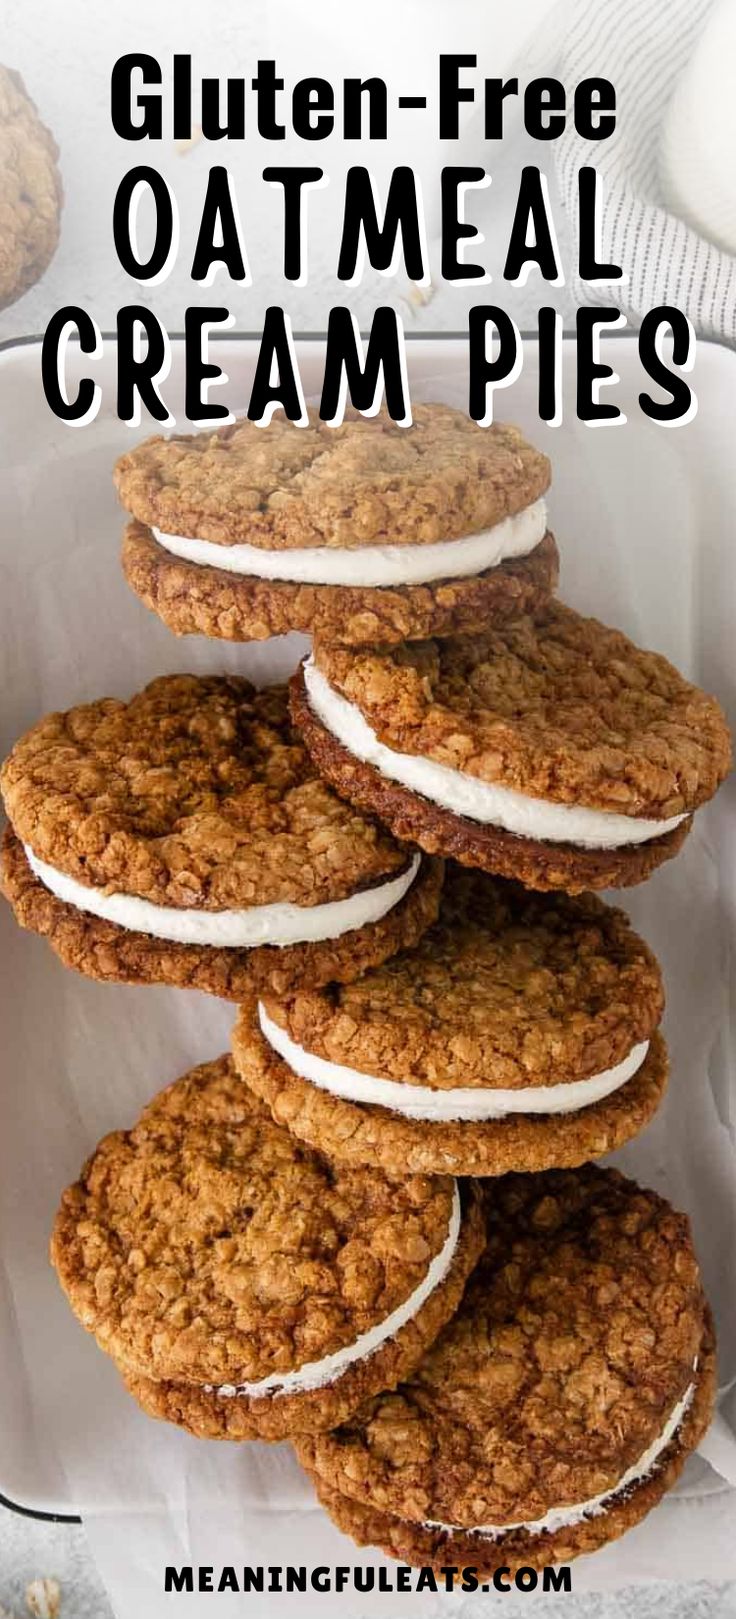 Six oatmeal cream pies leaning against each other in a ceramic dish. Snacks, Cake, Desserts, Sweet, Yum, Gfcf, Middle, Favs, Cakes